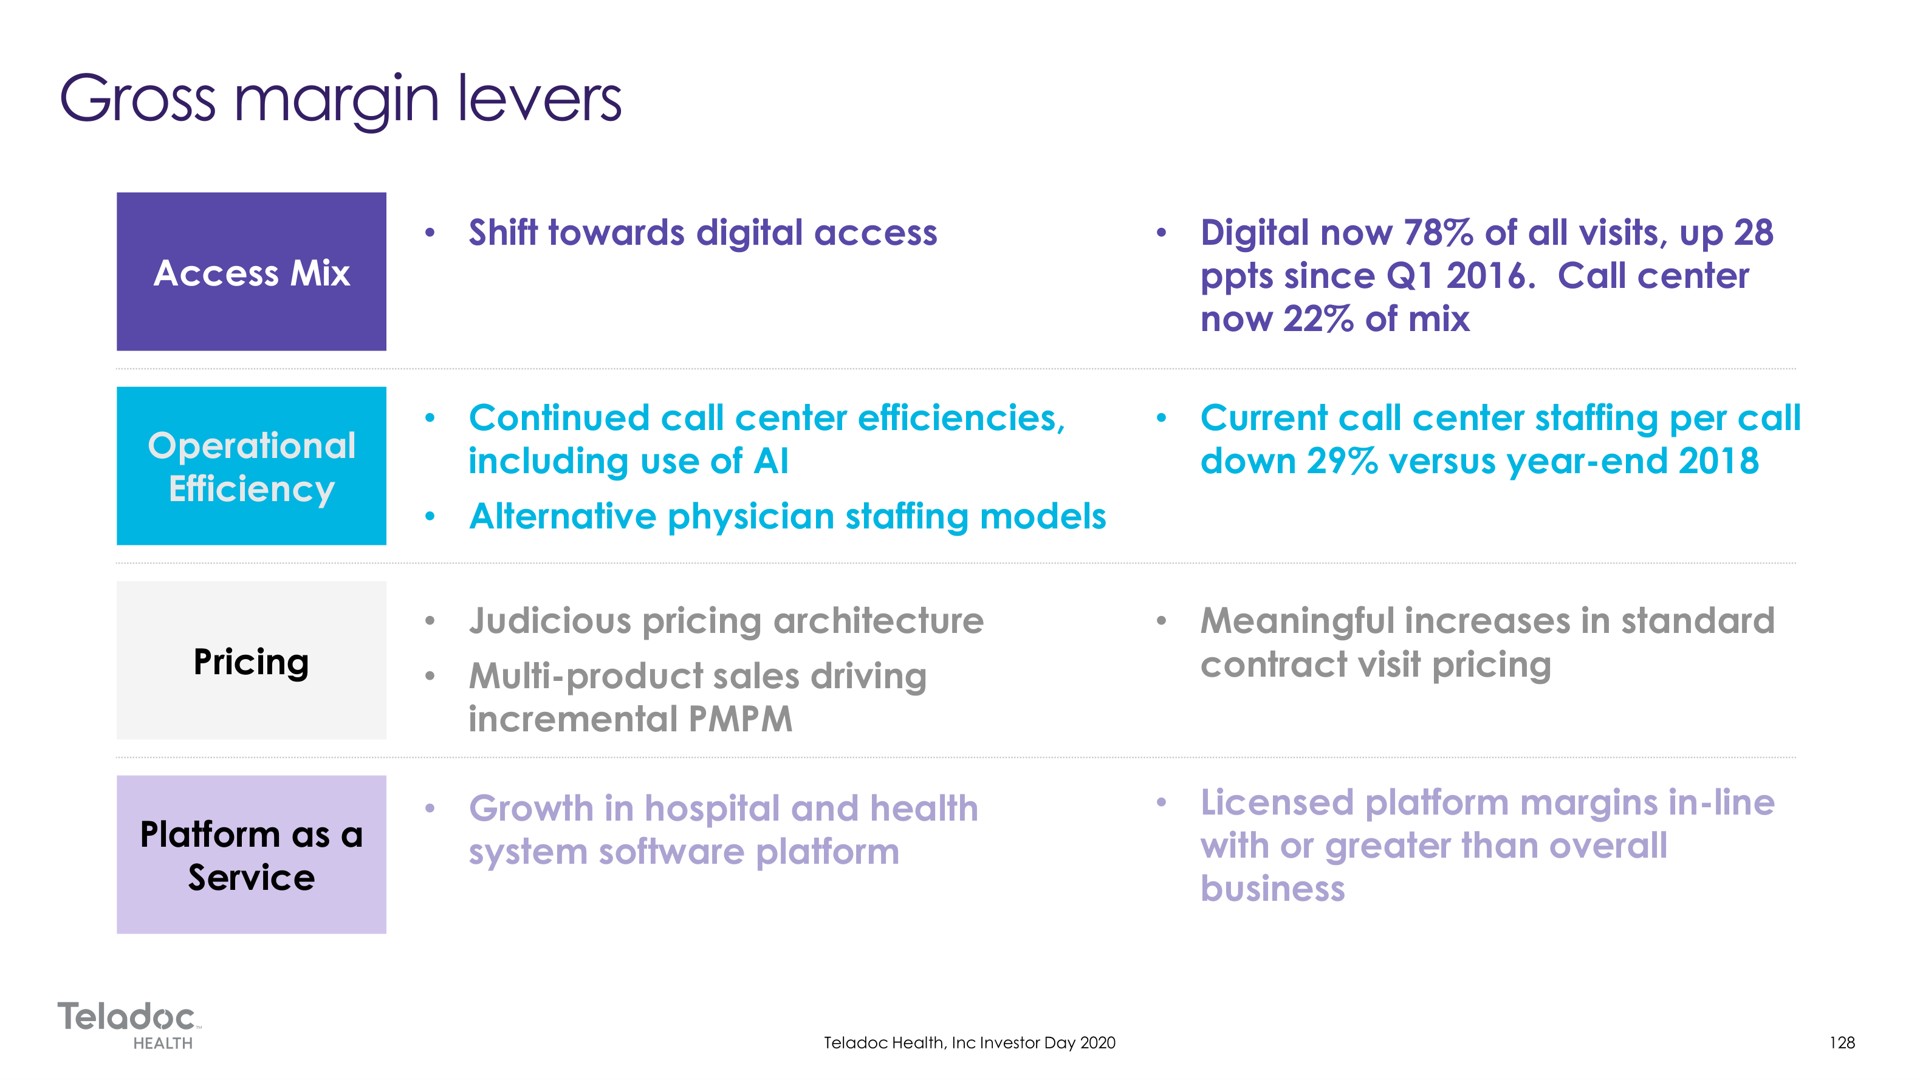 access mix operational efficiency shift towards digital access digital now of all visits up since call center now of mix continued call center efficiencies including use of current call center staffing per call down versus year end alternative physician staffing models judicious pricing architecture meaningful increases in standard pricing product sales driving incremental contract visit pricing platform as a service growth in hospital and health system platform licensed platform margins in line with or greater than overall business gross margin levers | Teladoc